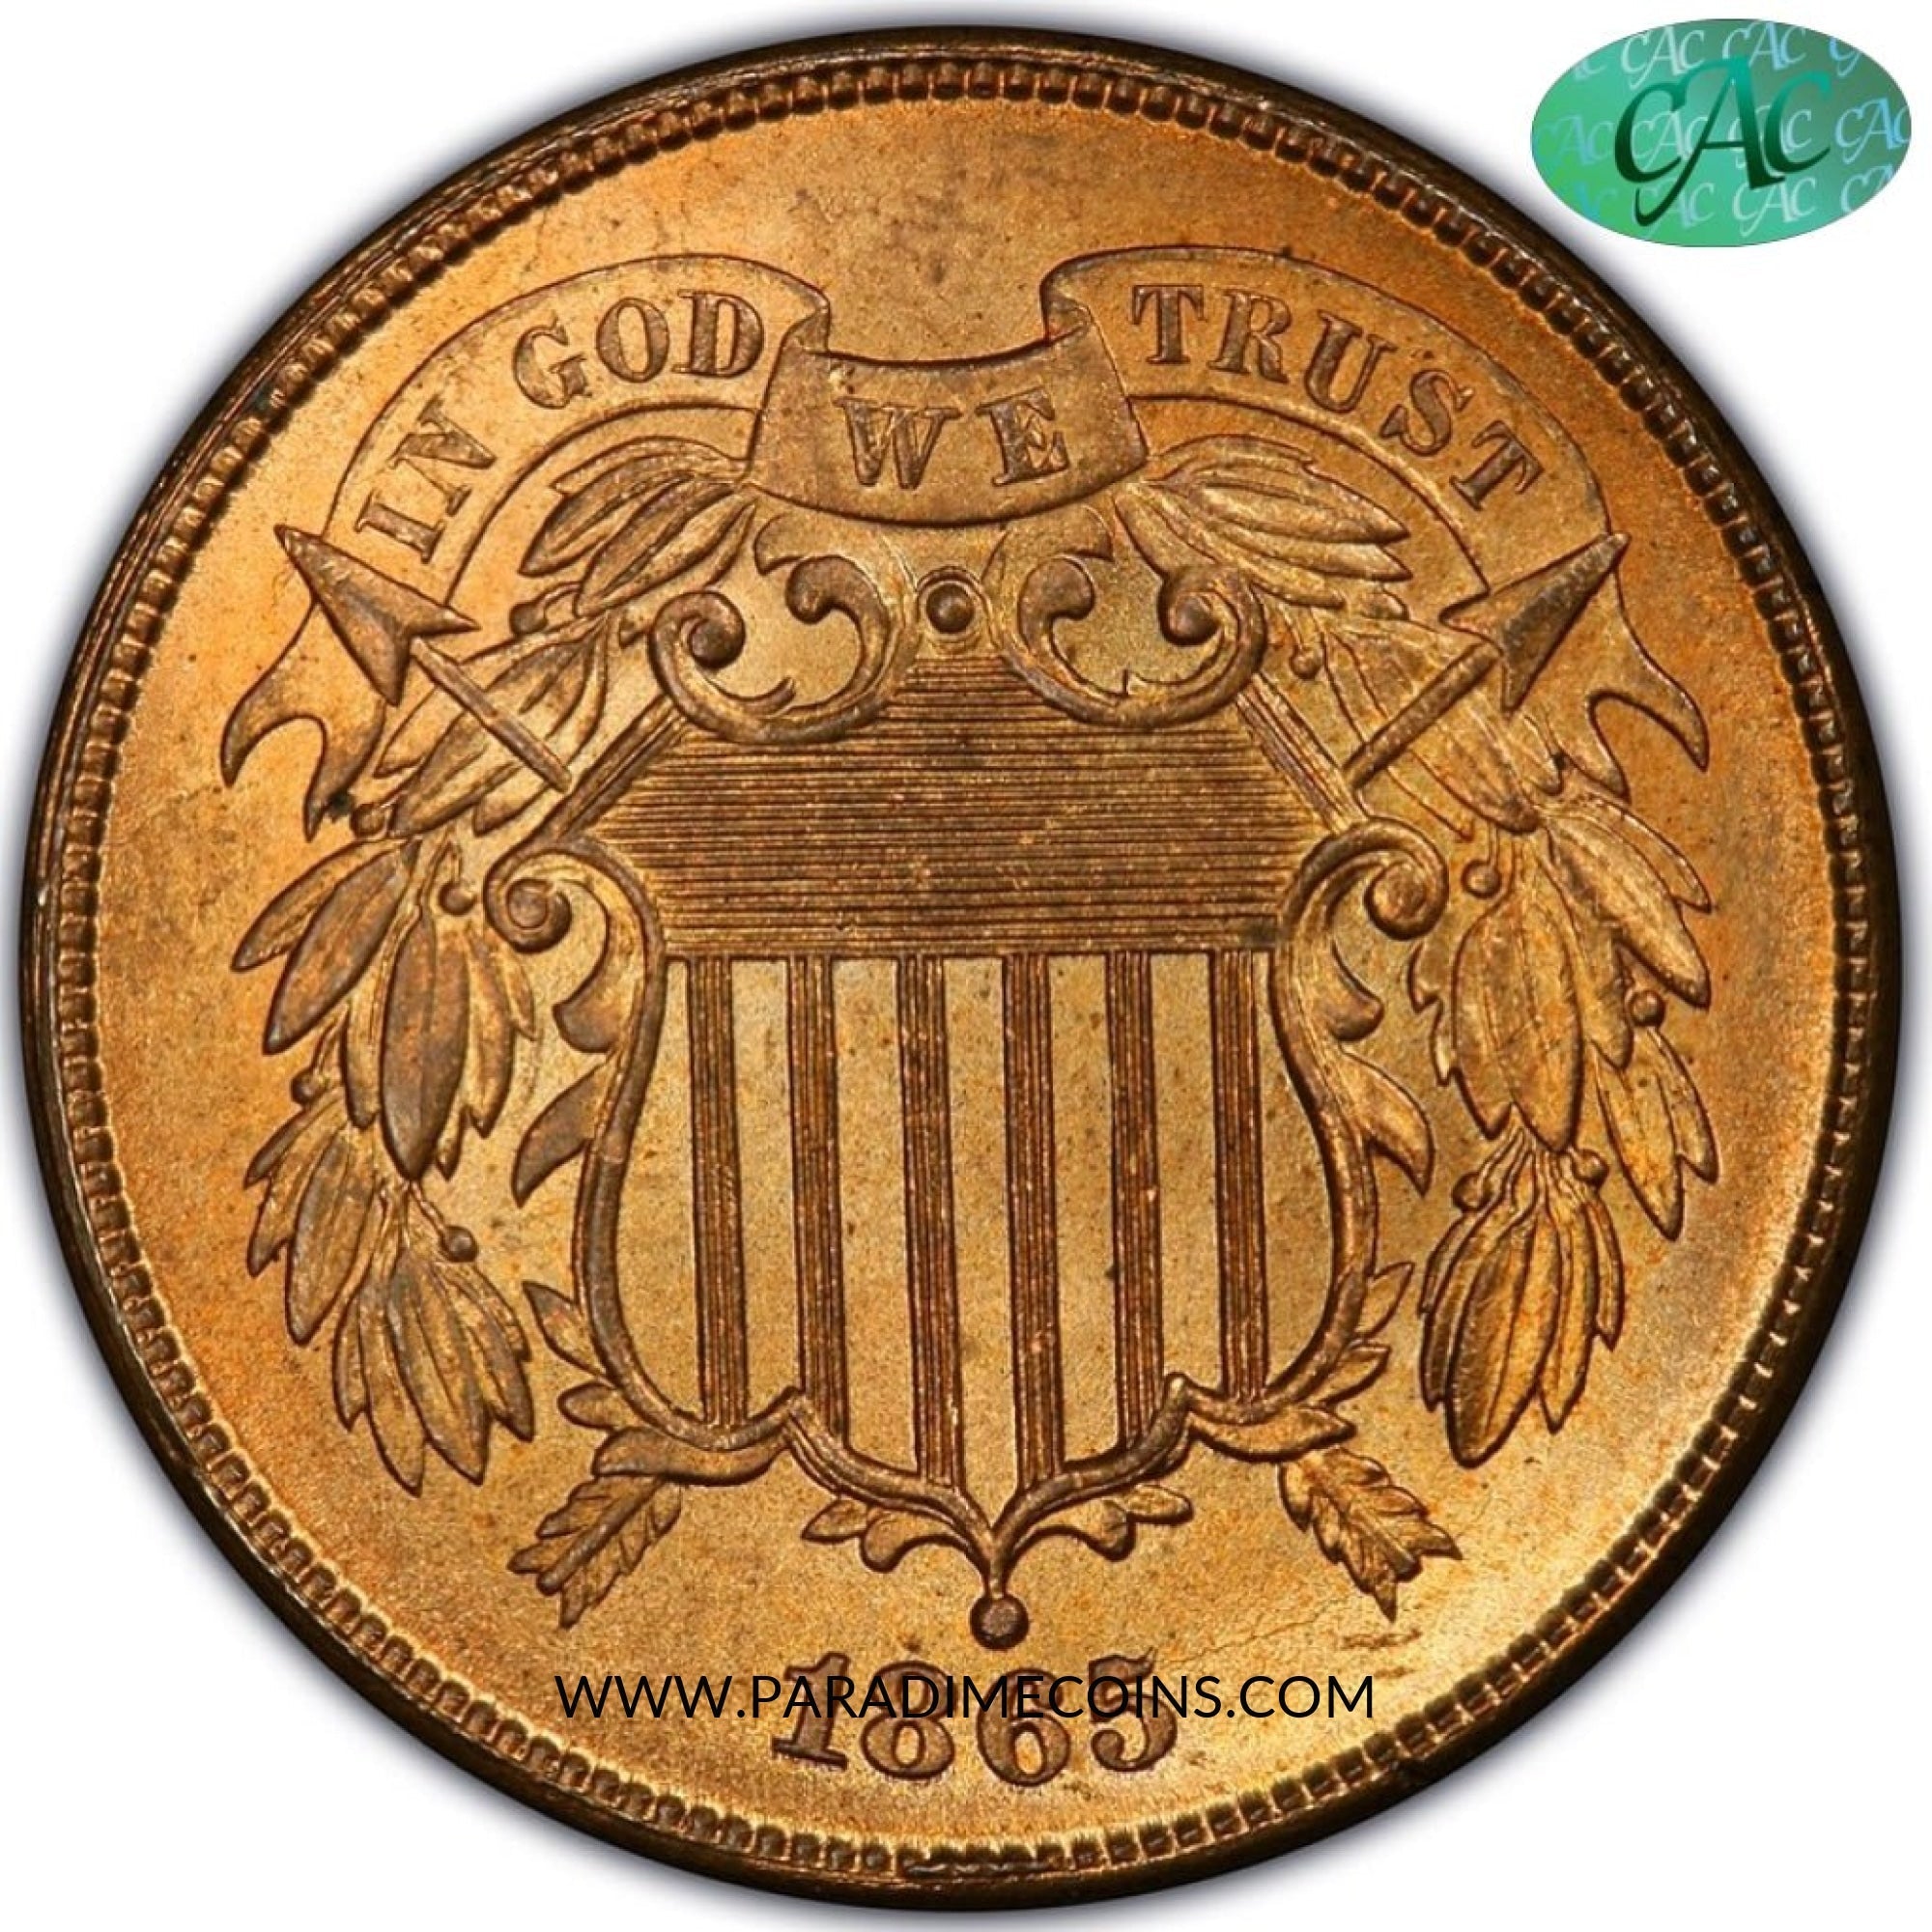 1865 Fancy 5 2C MS66RD PCGS CAC - Paradime Coins | PCGS NGC CACG CAC Rare US Numismatic Coins For Sale